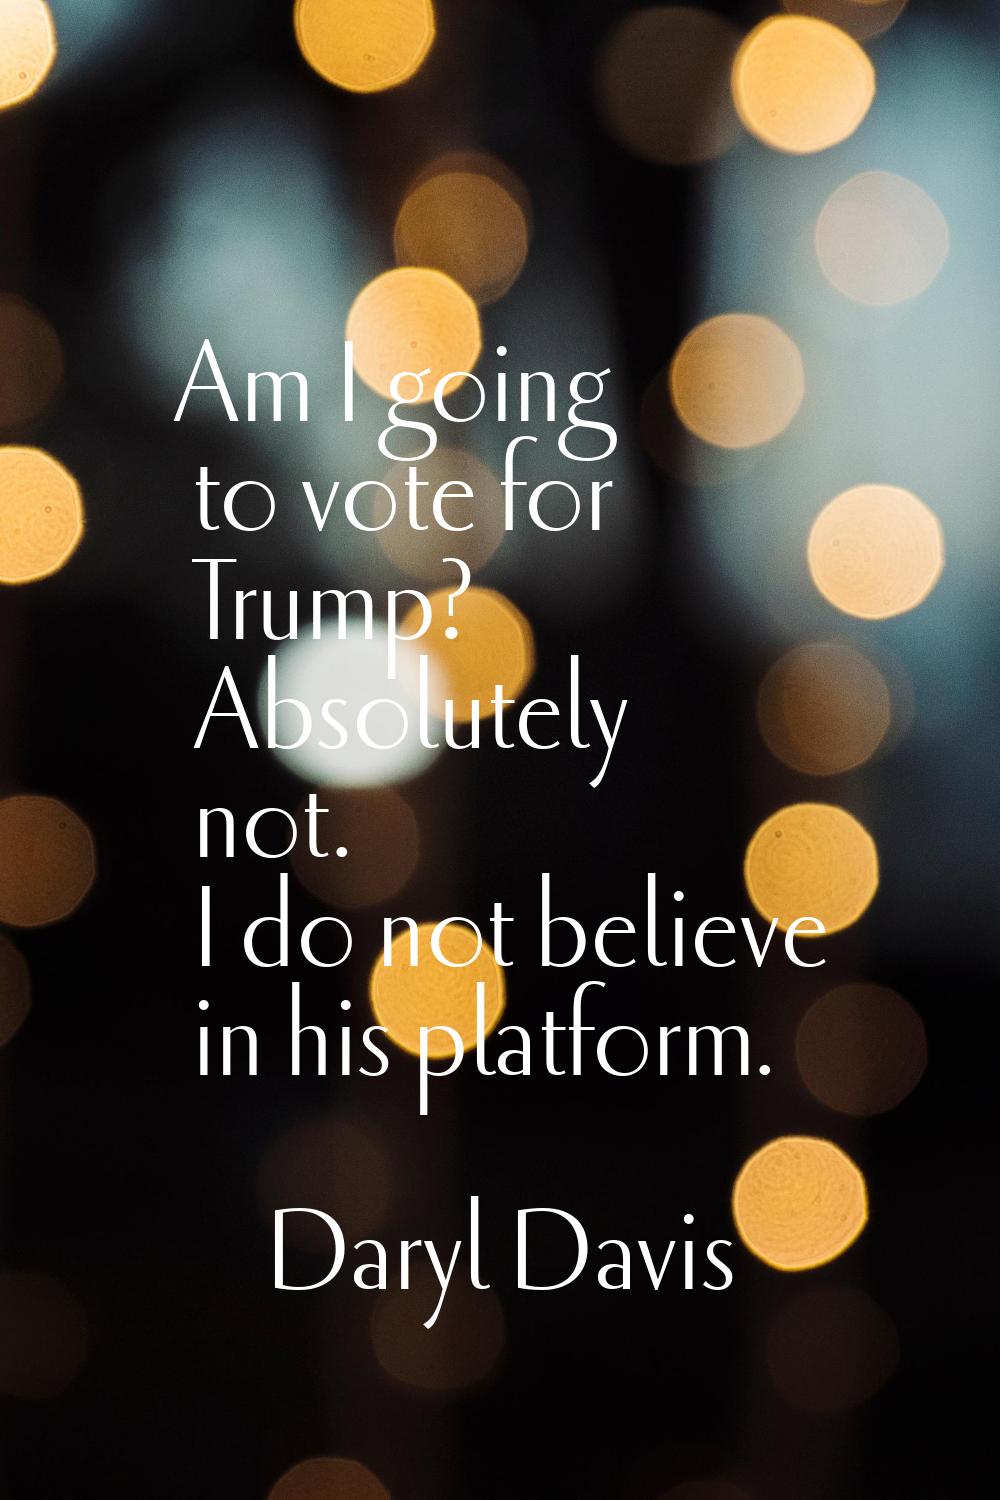 Am I going to vote for Trump? Absolutely not. I do not believe in his platform.